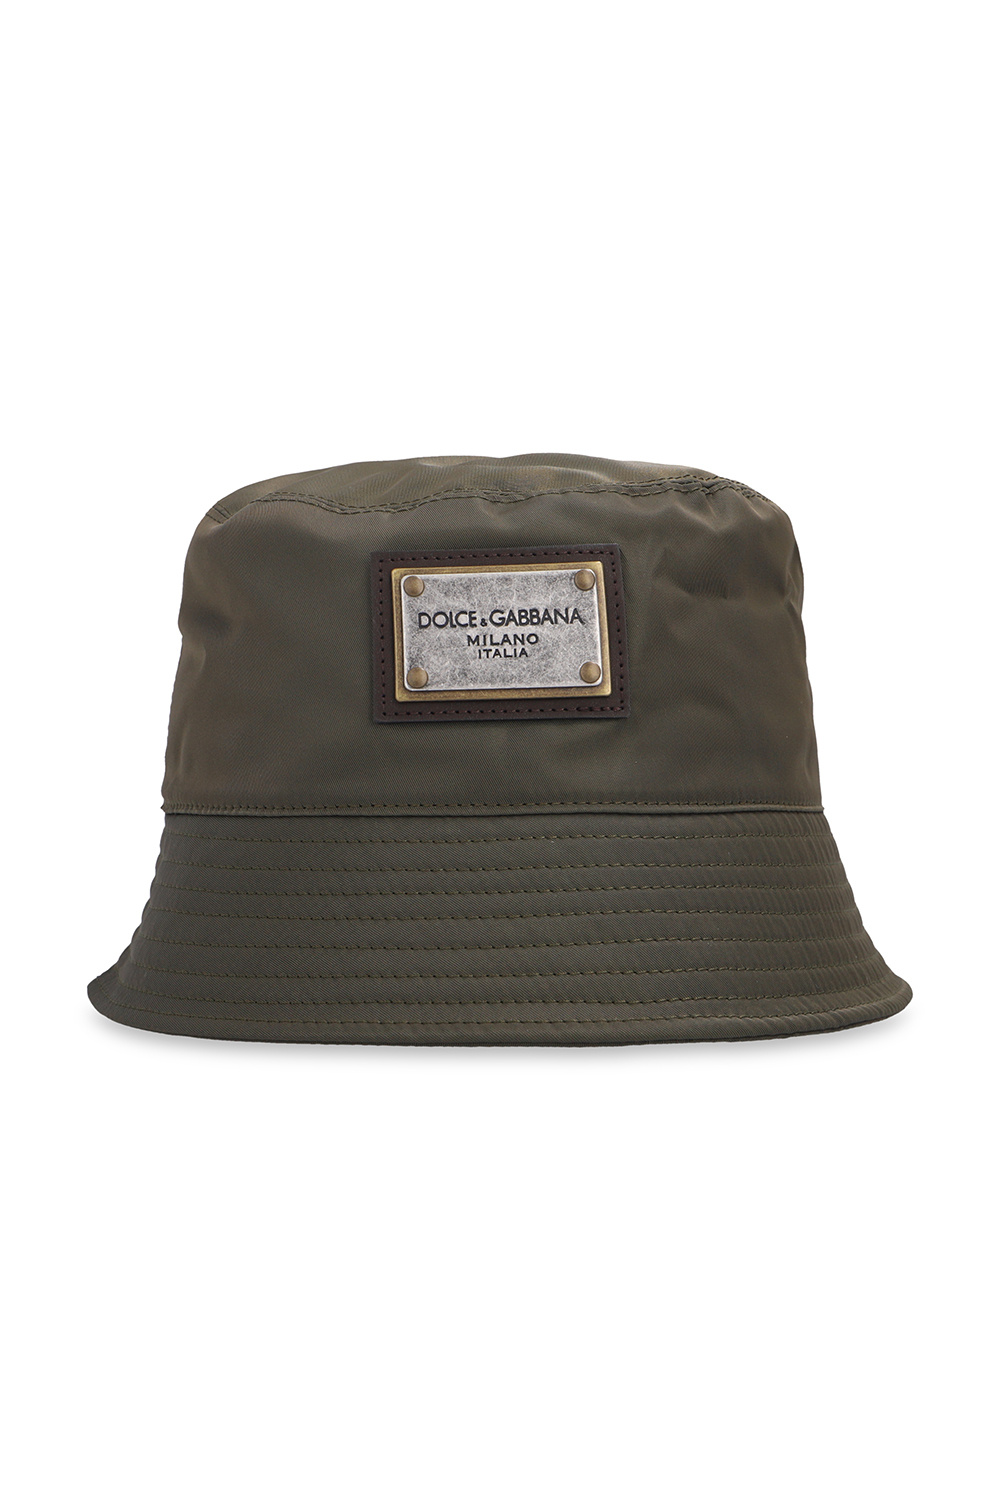 Dolce & Gabbana Logo-patched bucket hat